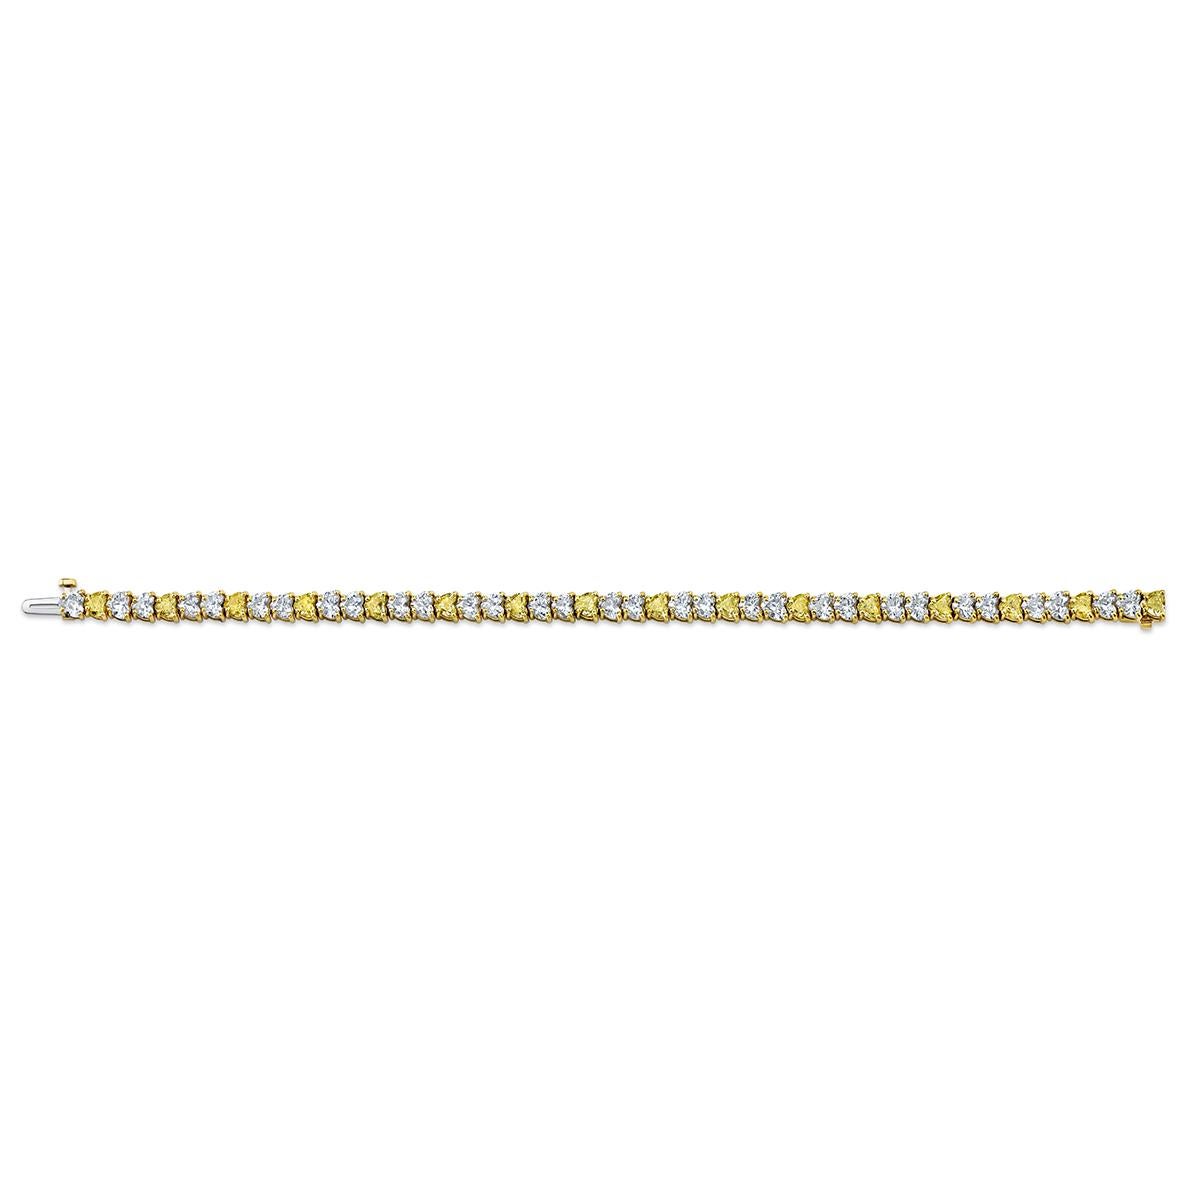 Alternating white and yellow  heart shape diamonds set in 18k yellow gold bracelet
47 stones 11.69 carats total weight
16 Natural Yellow HS Diamonds / 31 White HS Diamonds